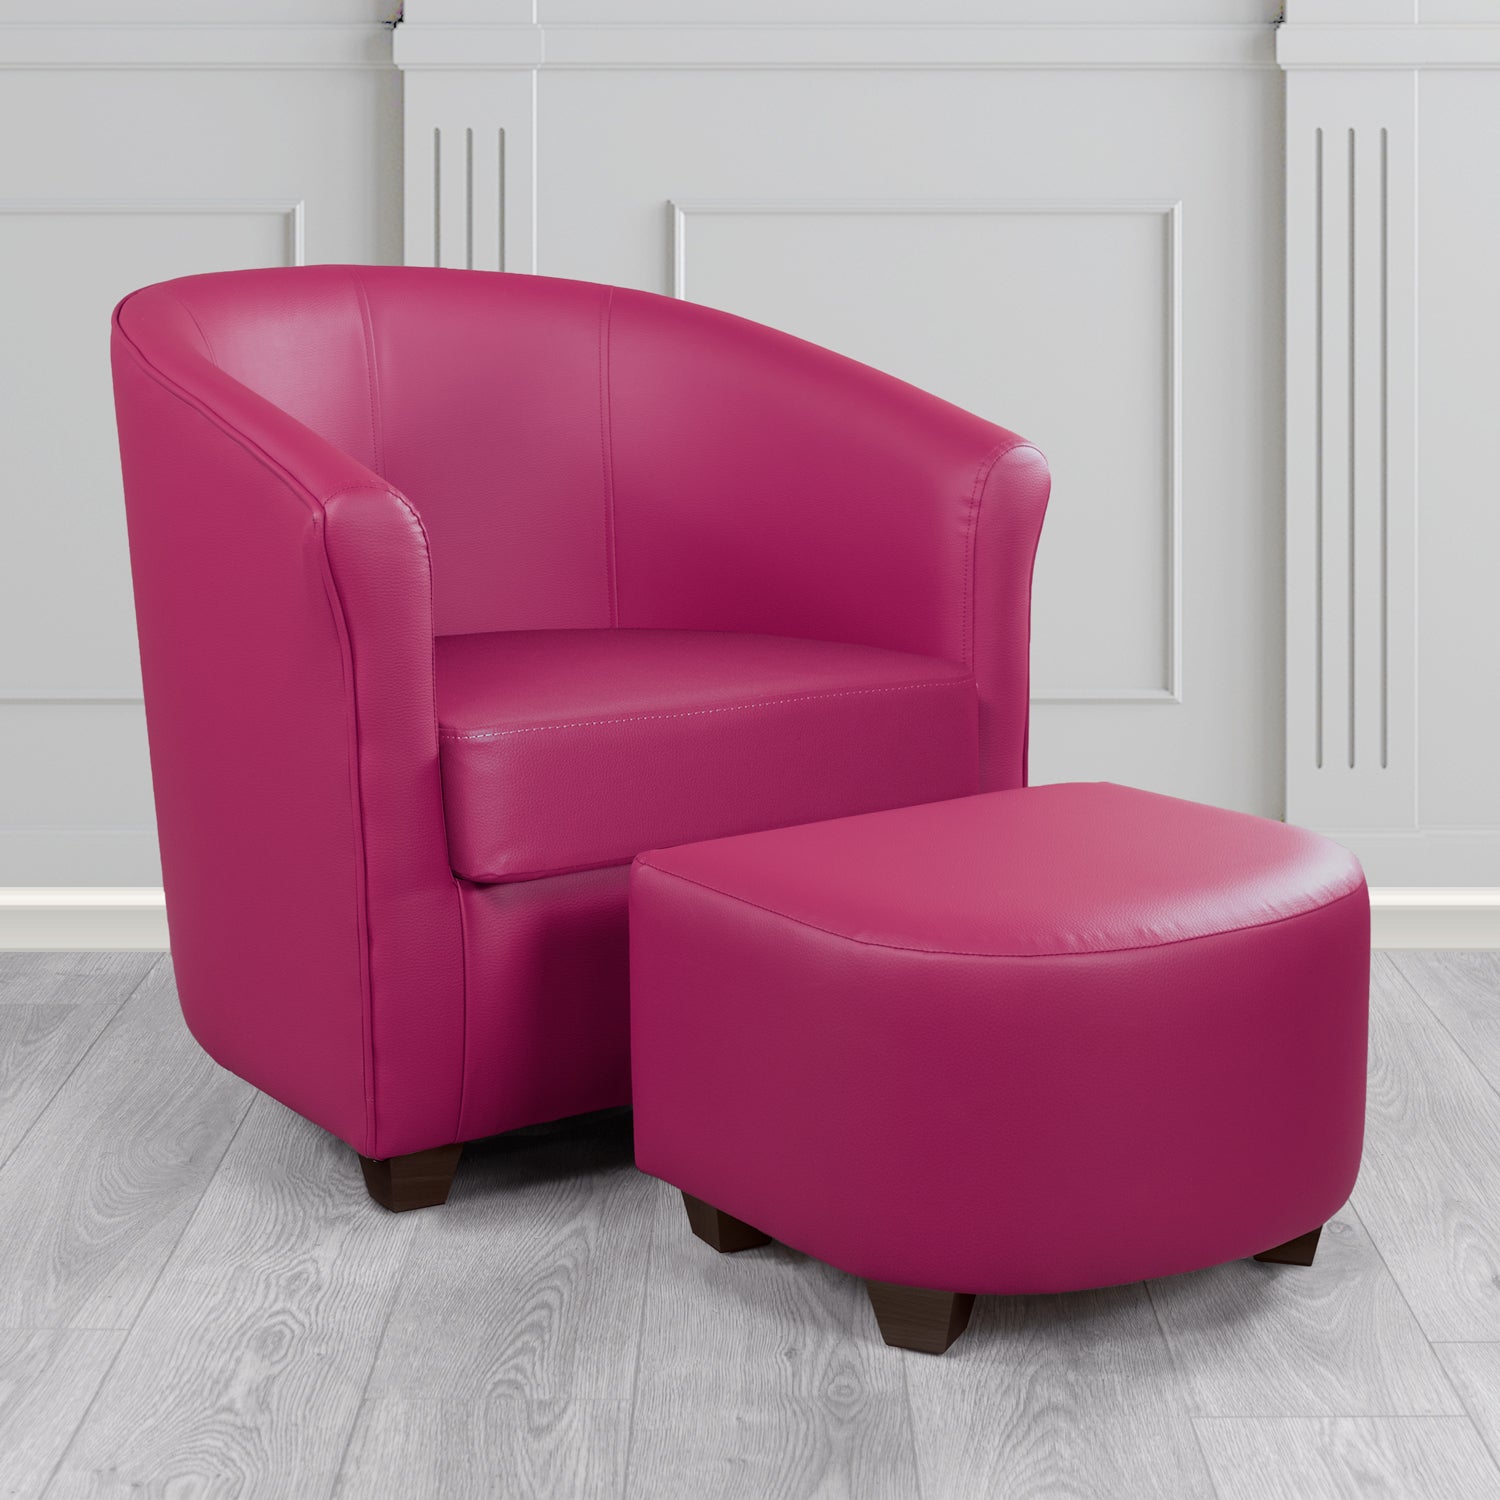 Cannes Tub Chair with Footstool Set in Just Colour Raspberry Crush Crib 5 Faux Leather - The Tub Chair Shop